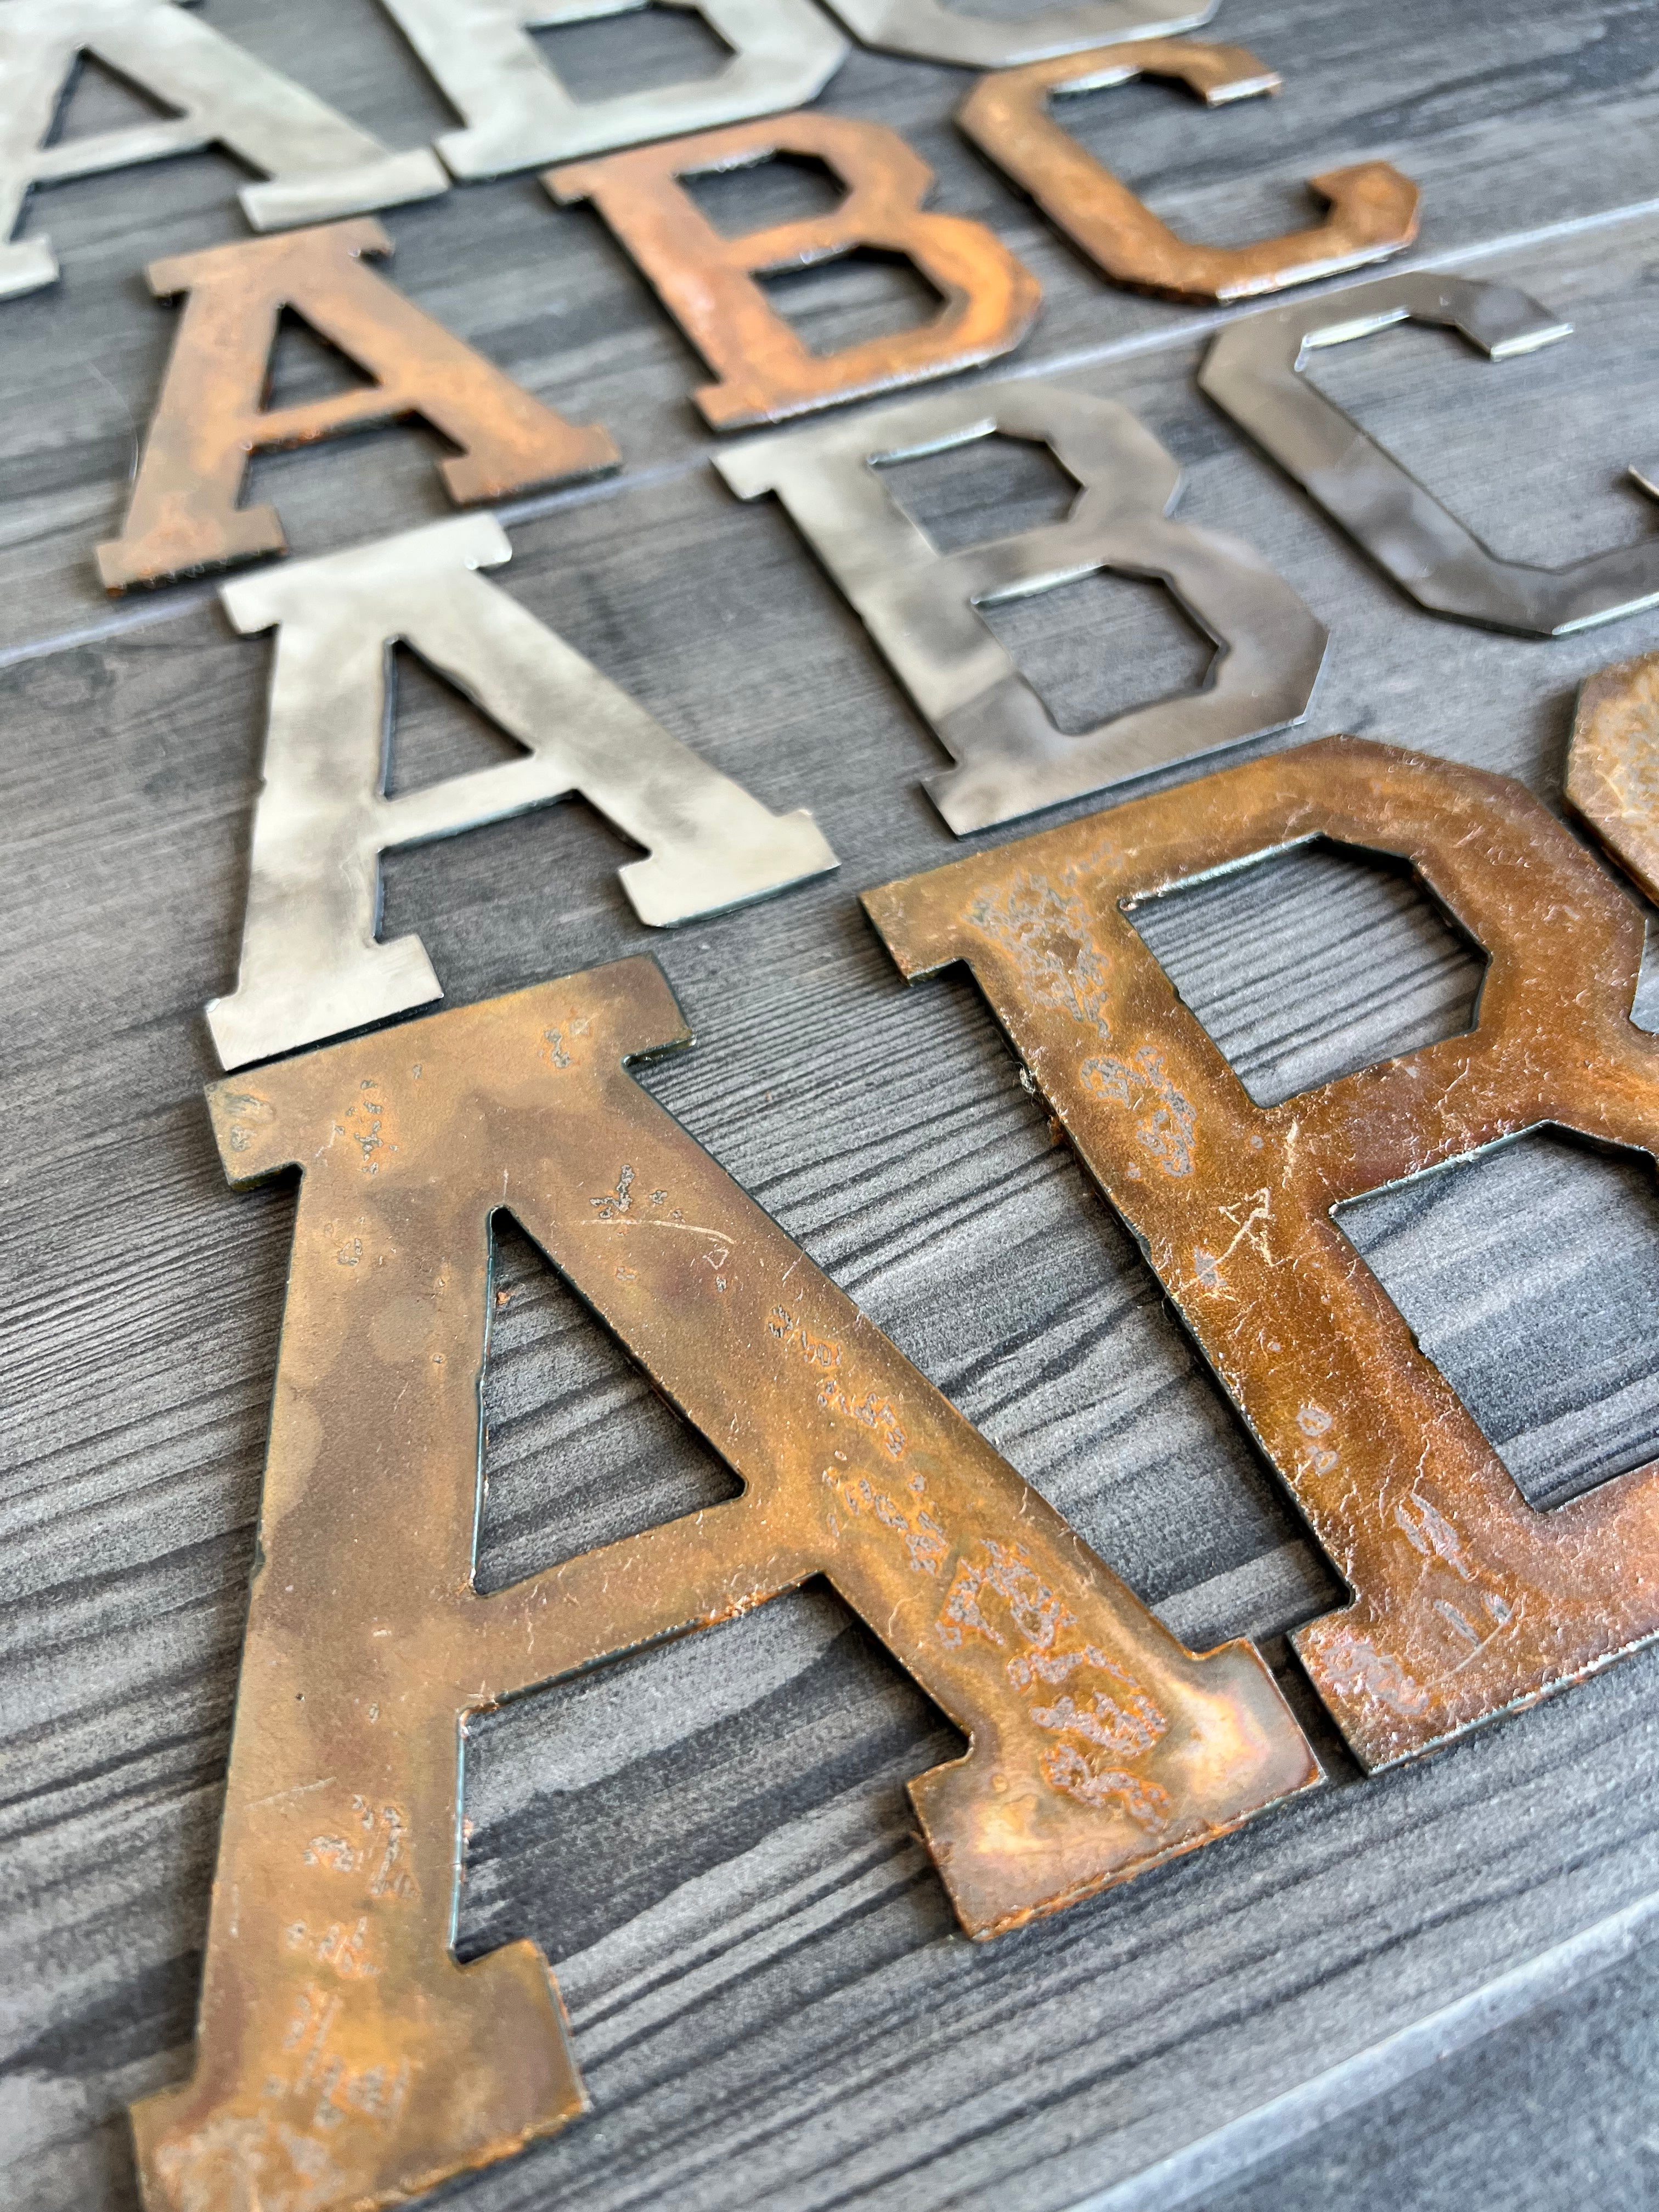 12 inch Metal Numbers and Letters- Rusty or Natural Steel, Natural / Add Mounting Holes | Forgery Metalworks